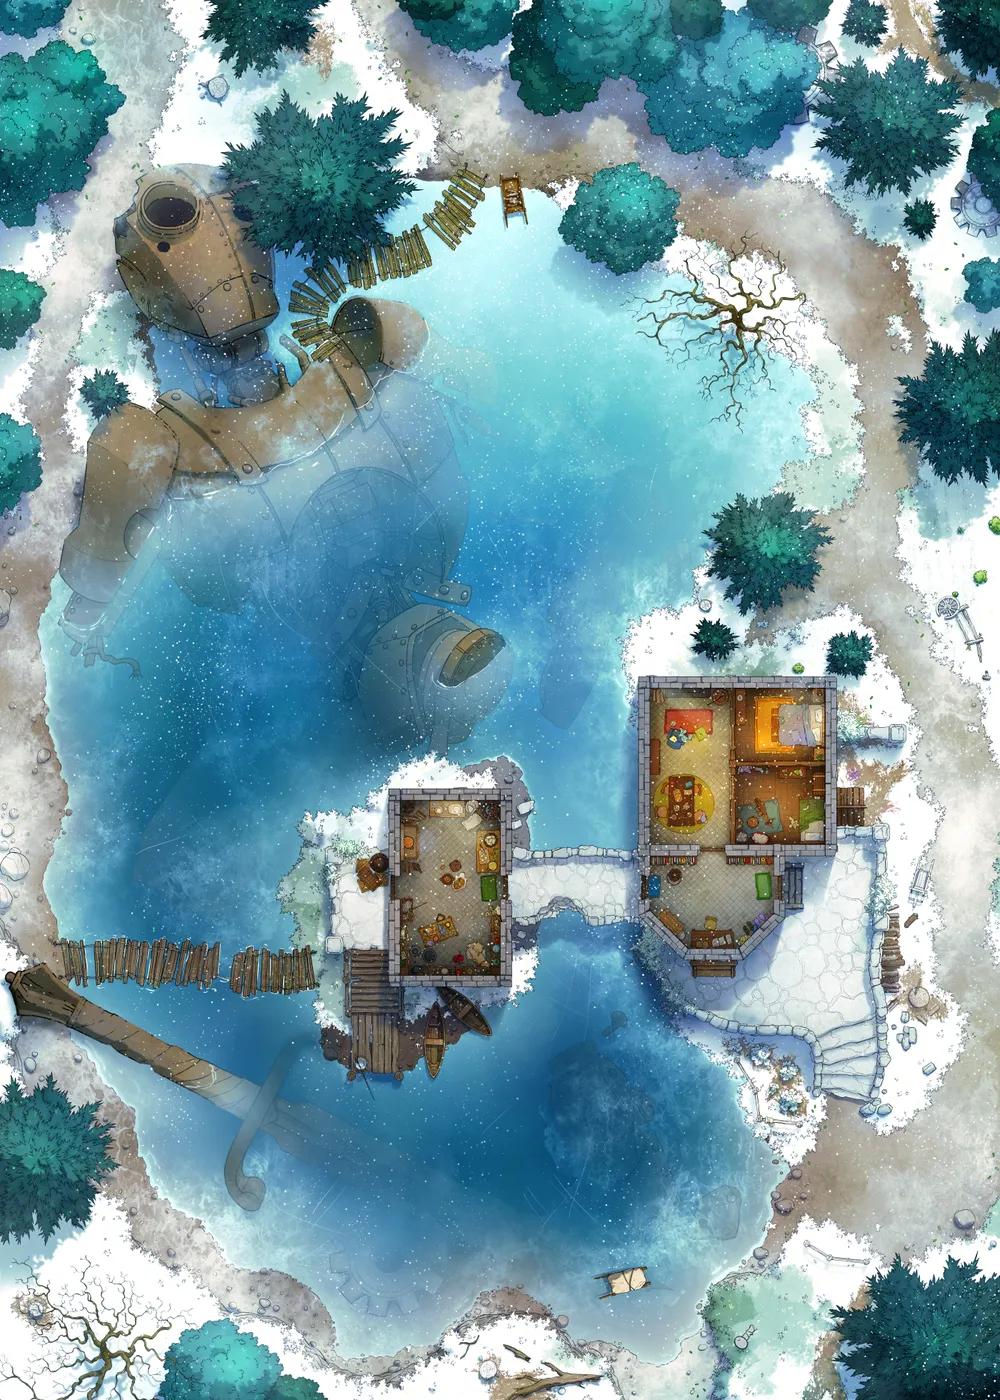 Rusty Robot Lake map, Winter Day variant